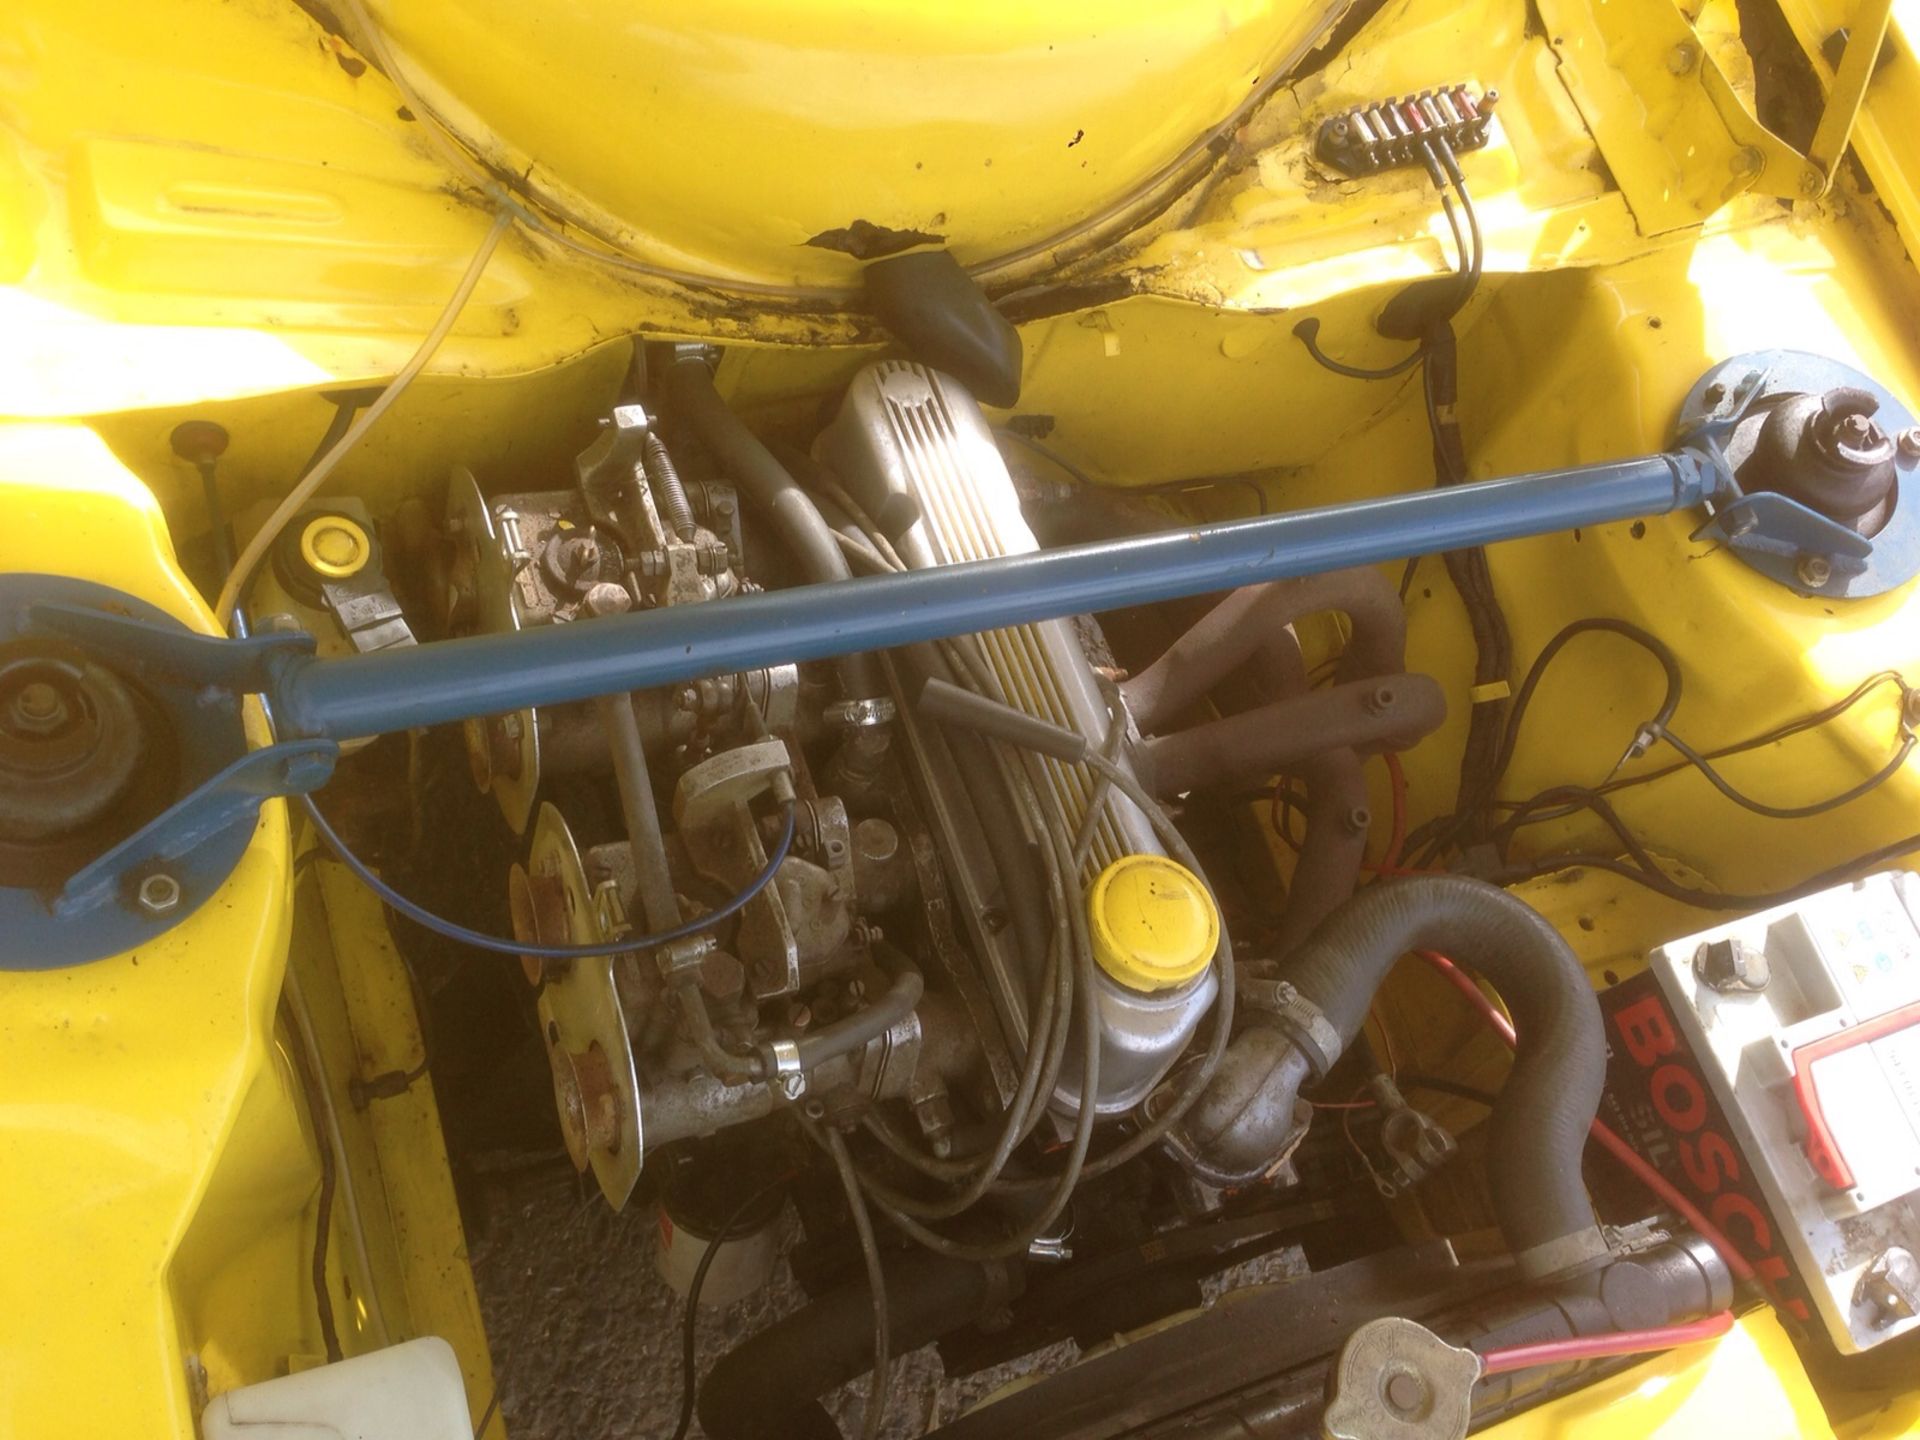 1979/T Ford Escort mk2 1600 Sport - in Signal yellow -  UK car  (545 miles) since rebuild - Image 28 of 54